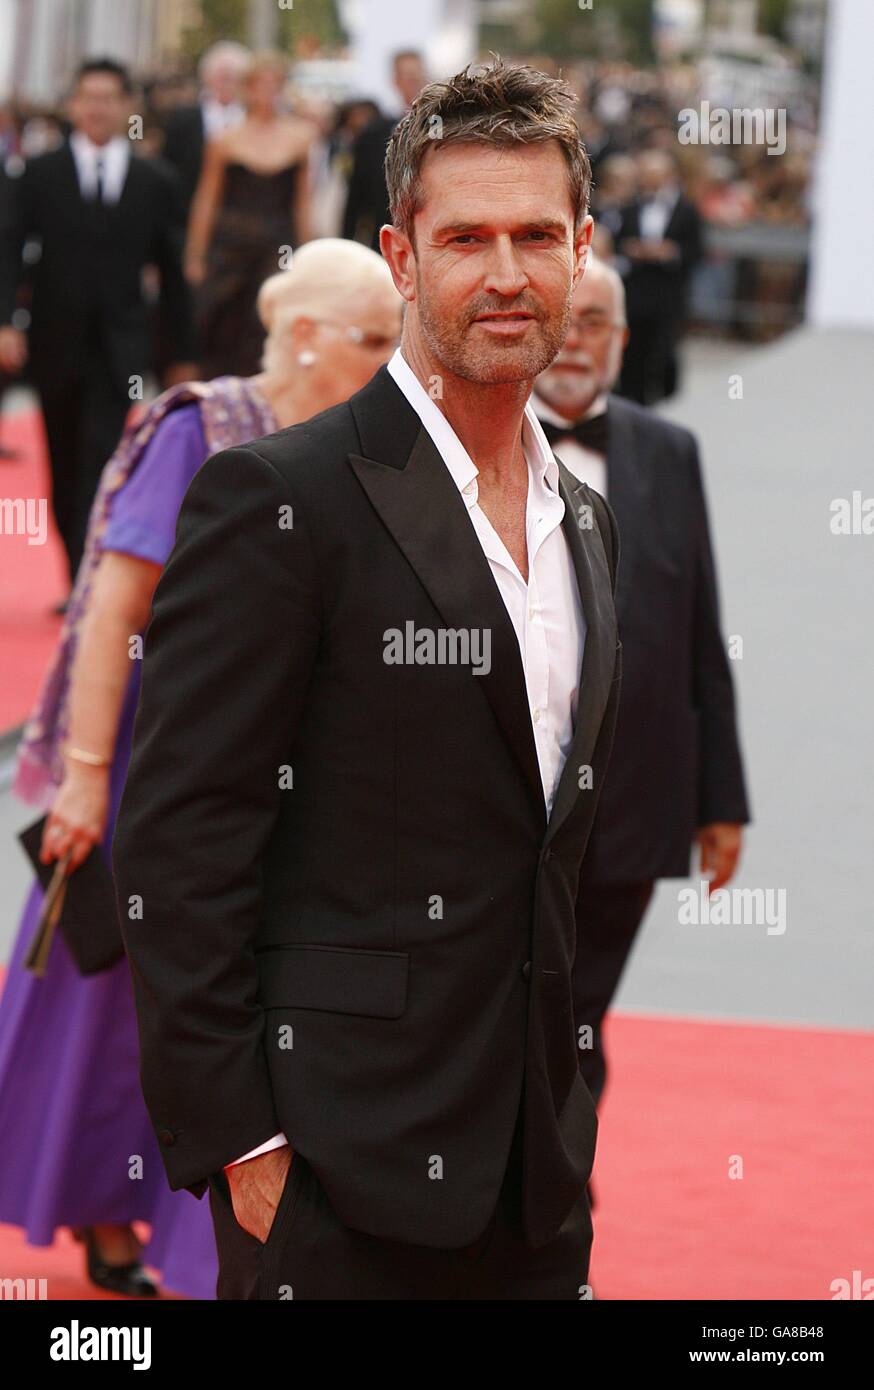 Rupert Everett at the premiere of Atonement at the 64th Venice International Film Festival. Stock Photo